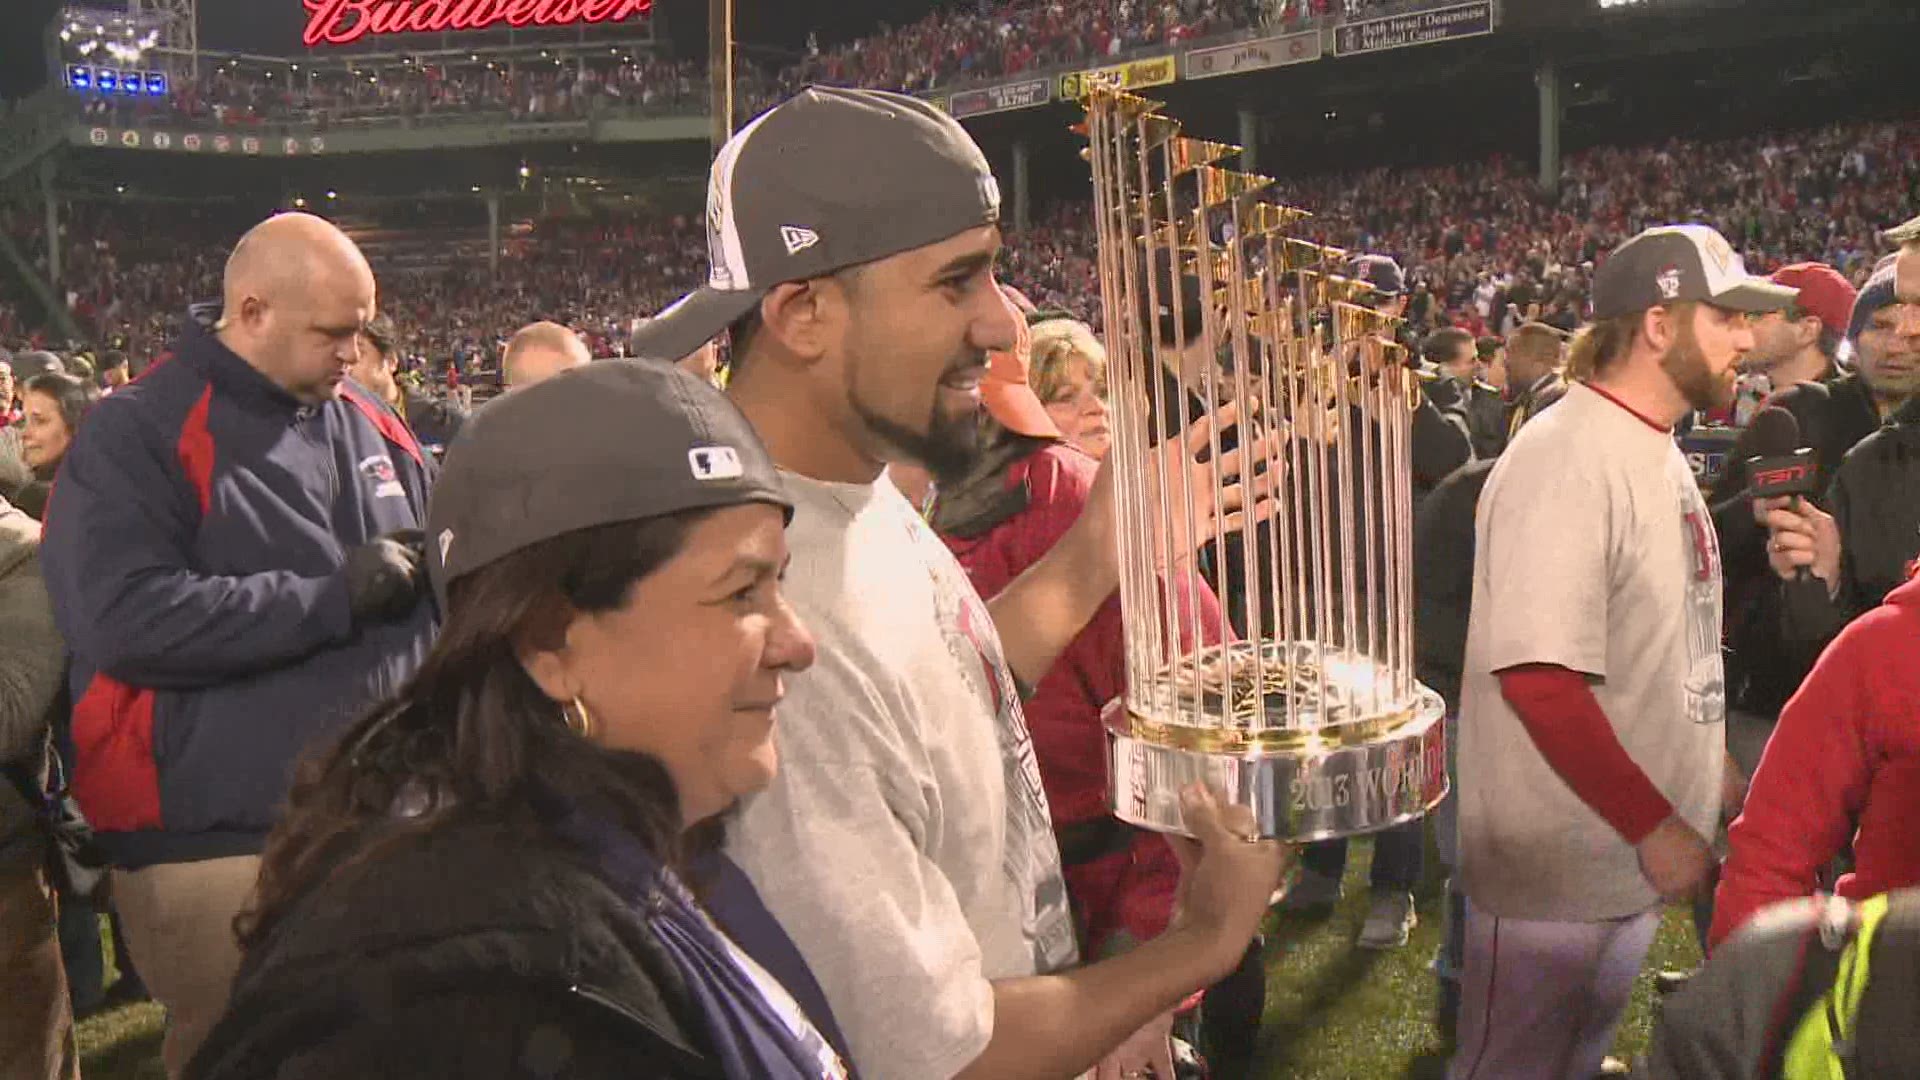 Taking a look back at the Boston Red Sox' 2013 World Series victory